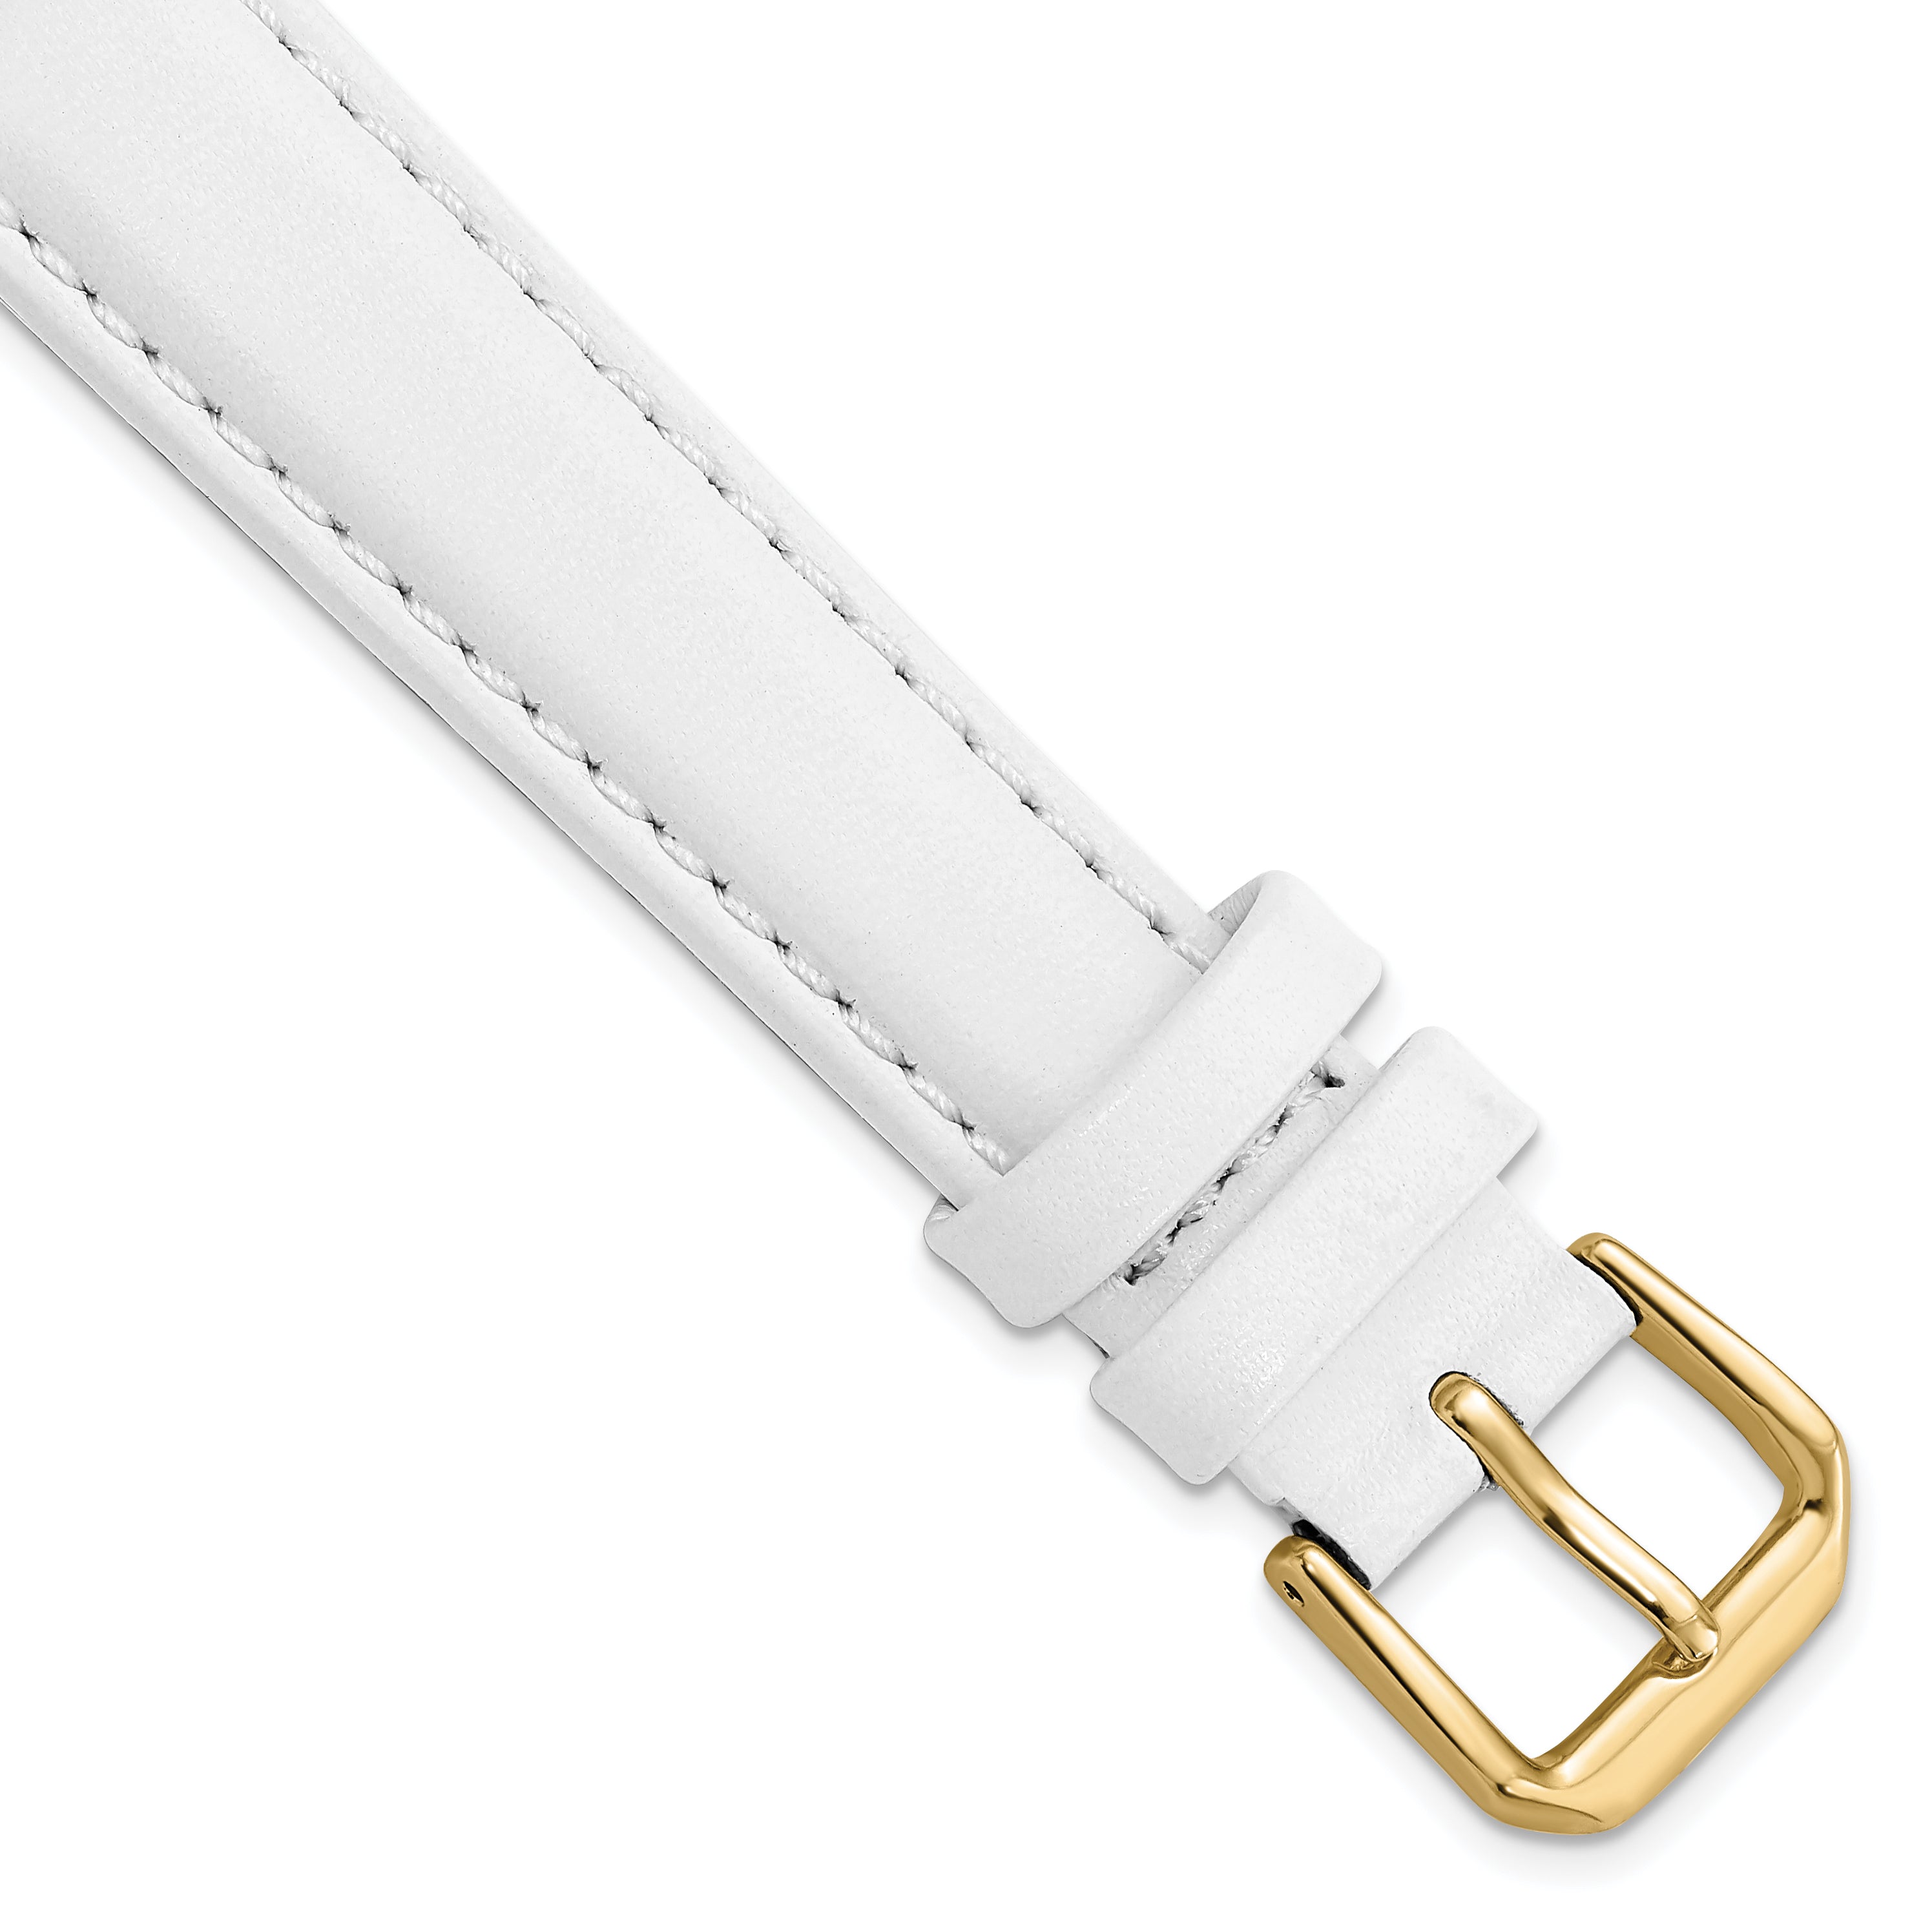 DeBeer 14mm White Smooth Leather with Gold-tone Buckle 6.75 inch Watch Band